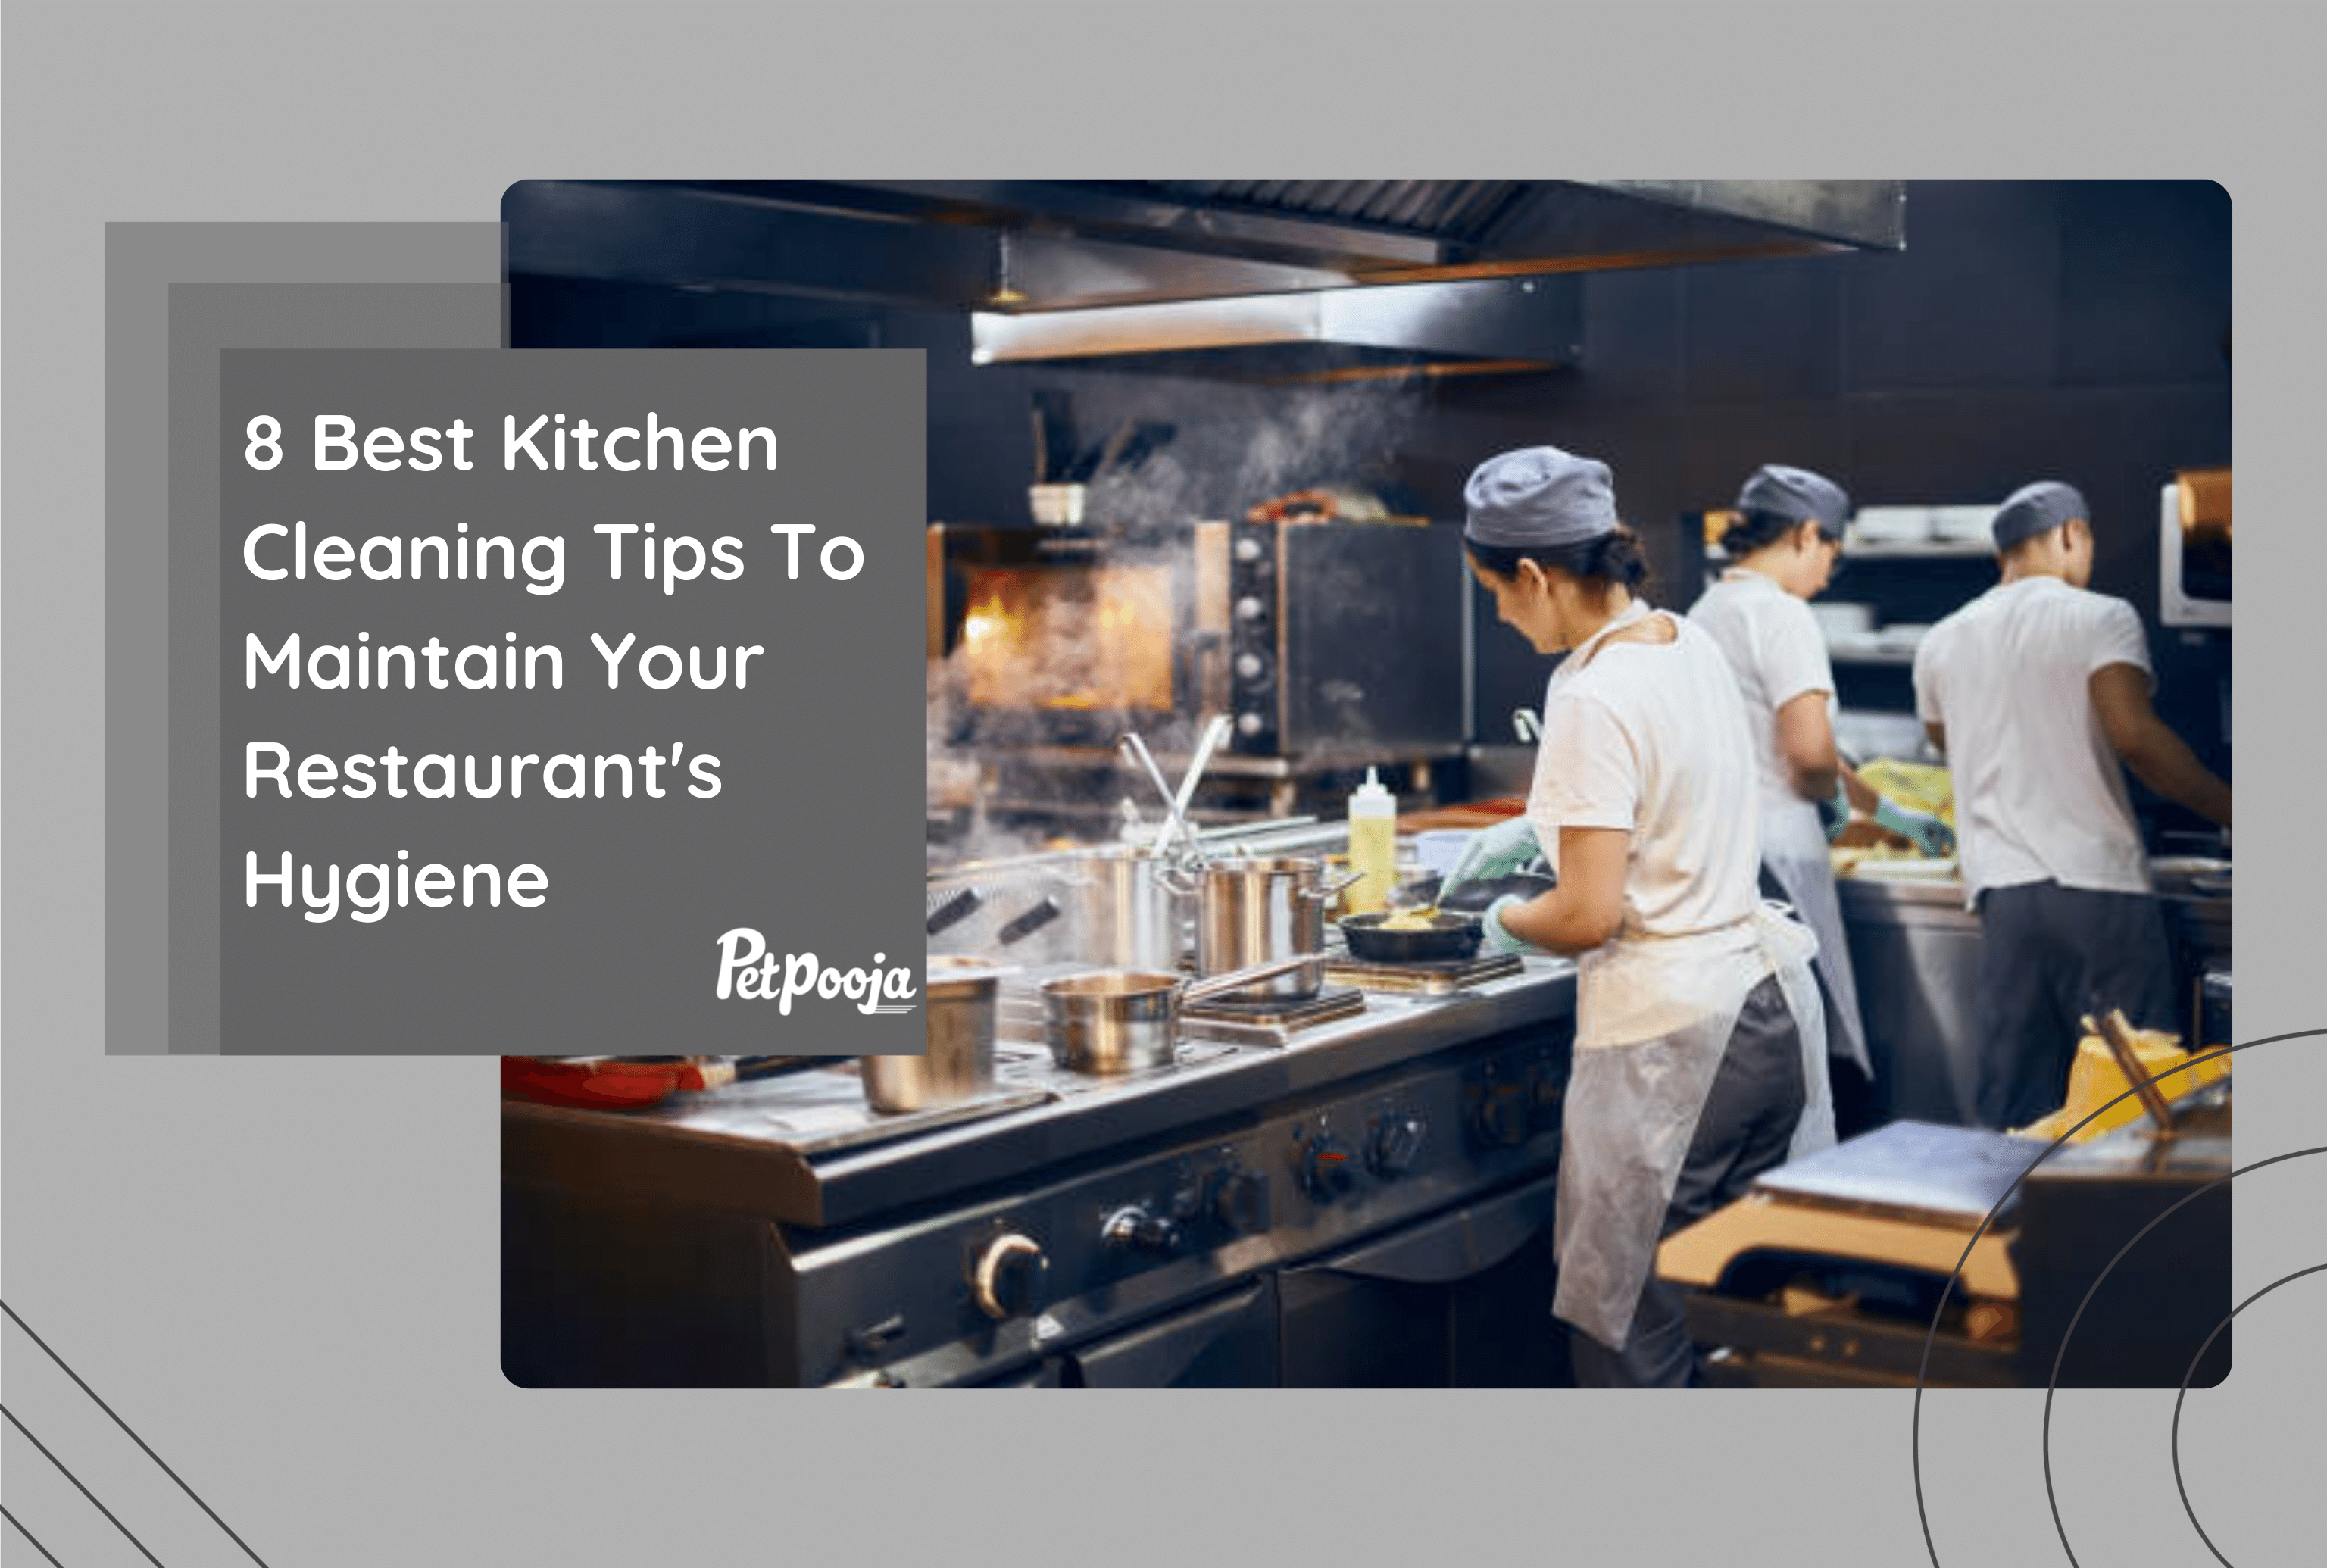 Learn tips to keep your restaurant kitchen clean!